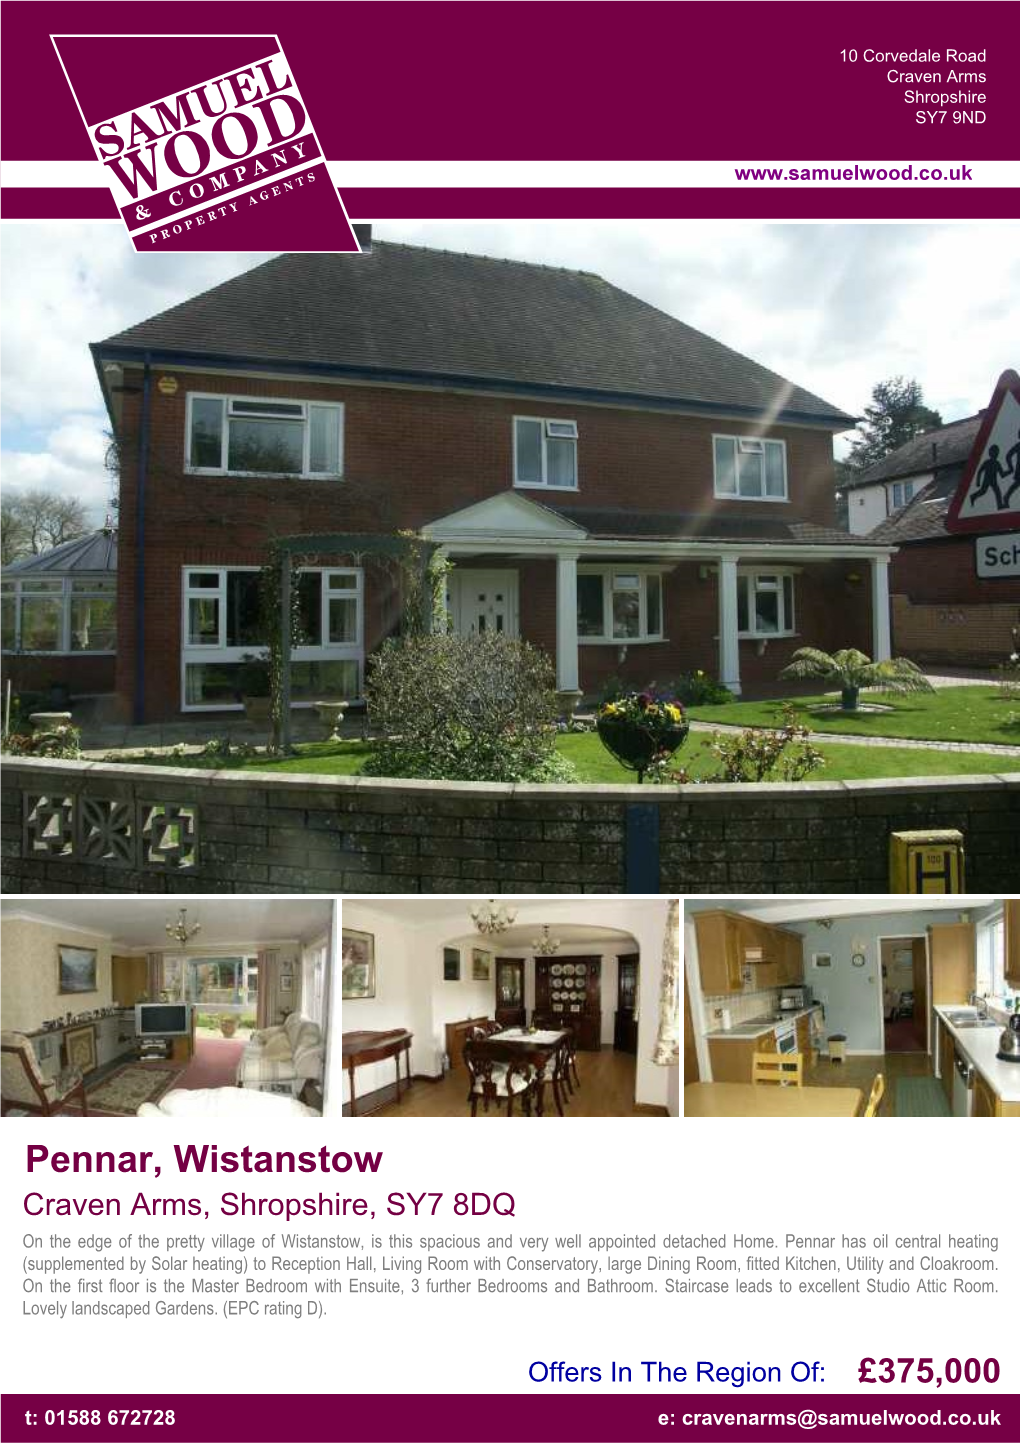 Pennar, Wistanstow Craven Arms, Shropshire, SY7 8DQ on the Edge of the Pretty Village of Wistanstow, Is This Spacious and Very Well Appointed Detached Home